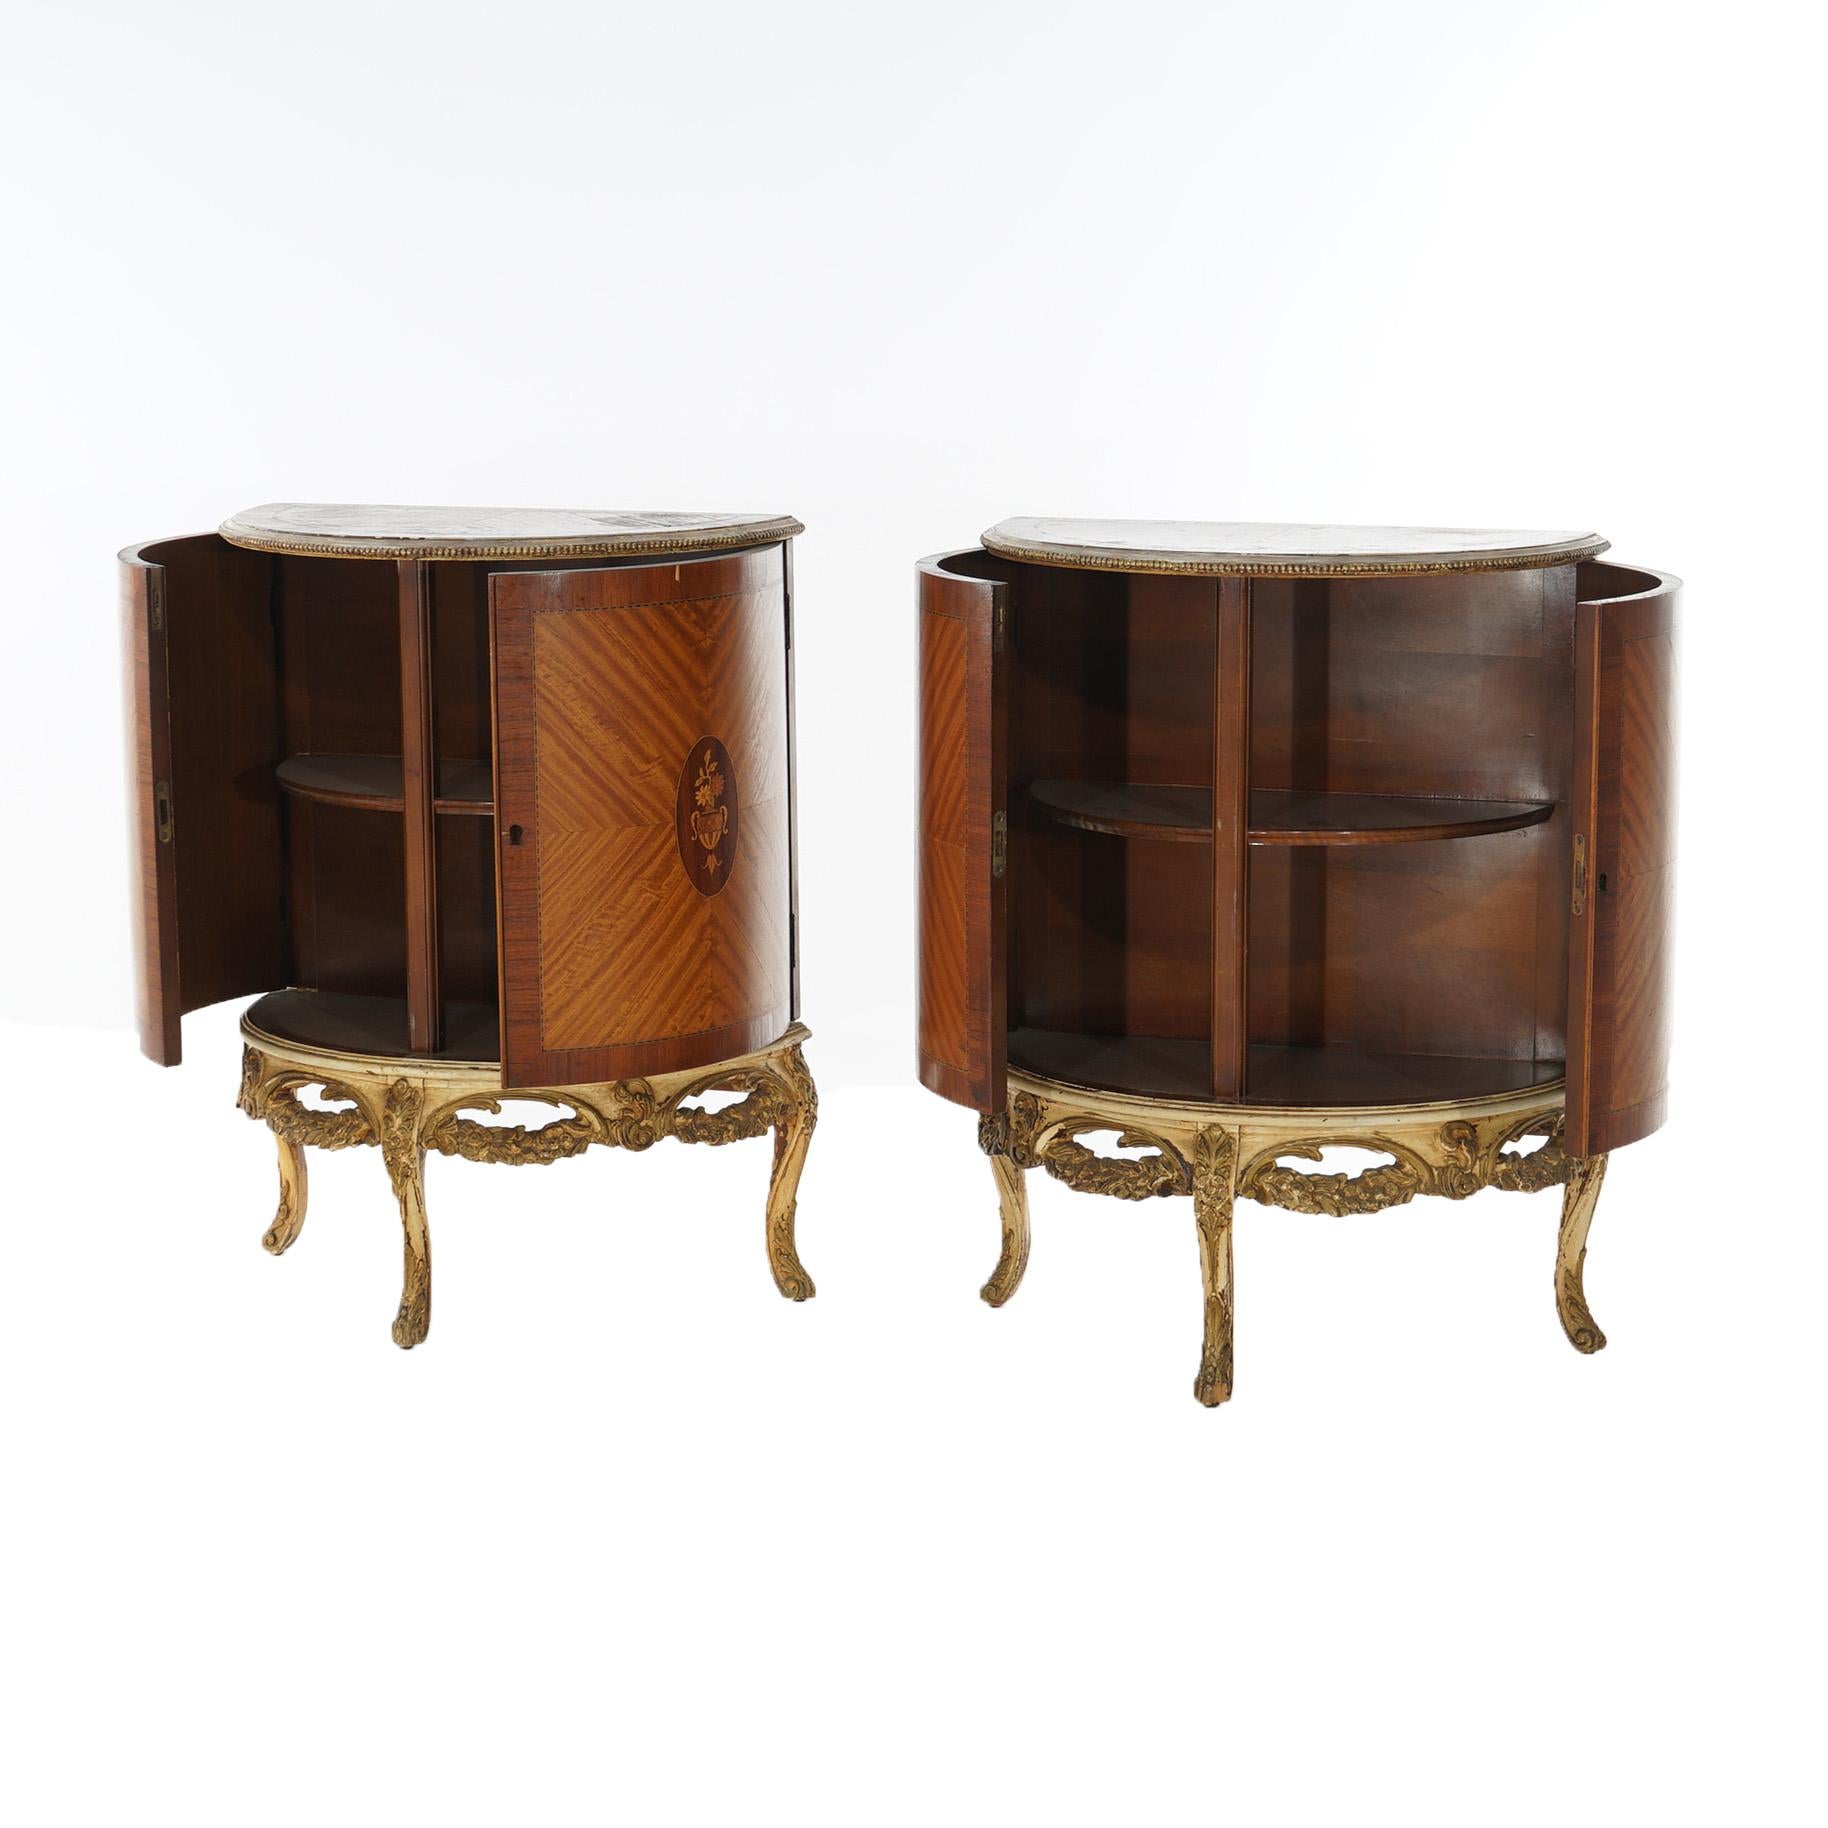 Two Antique Antique French Satinwood Inlaid Marquetry Demilune Side Tables C1920 For Sale 2